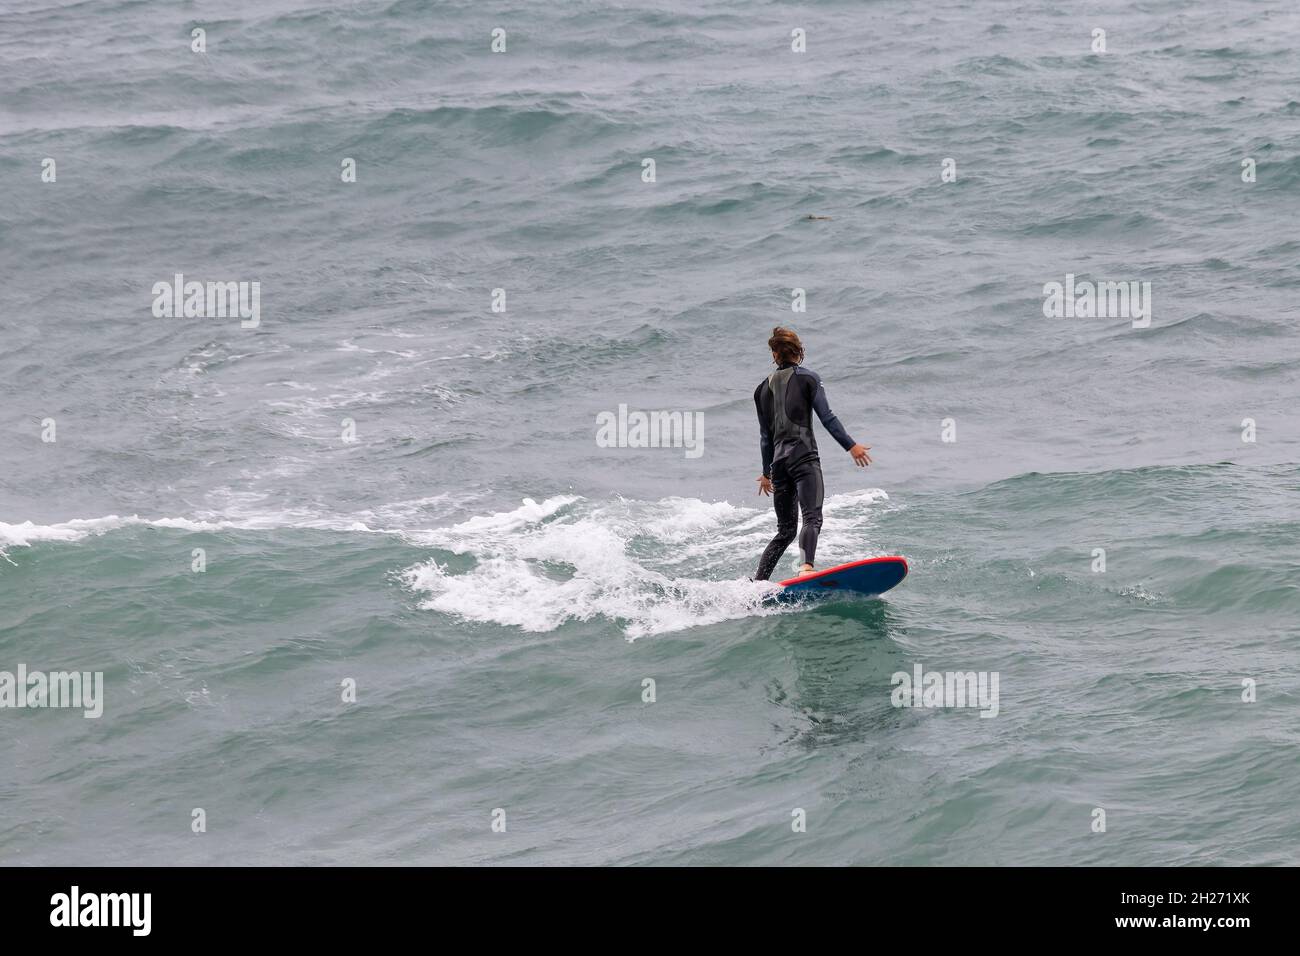 wetsuit surfer catching a wave Stock Photo